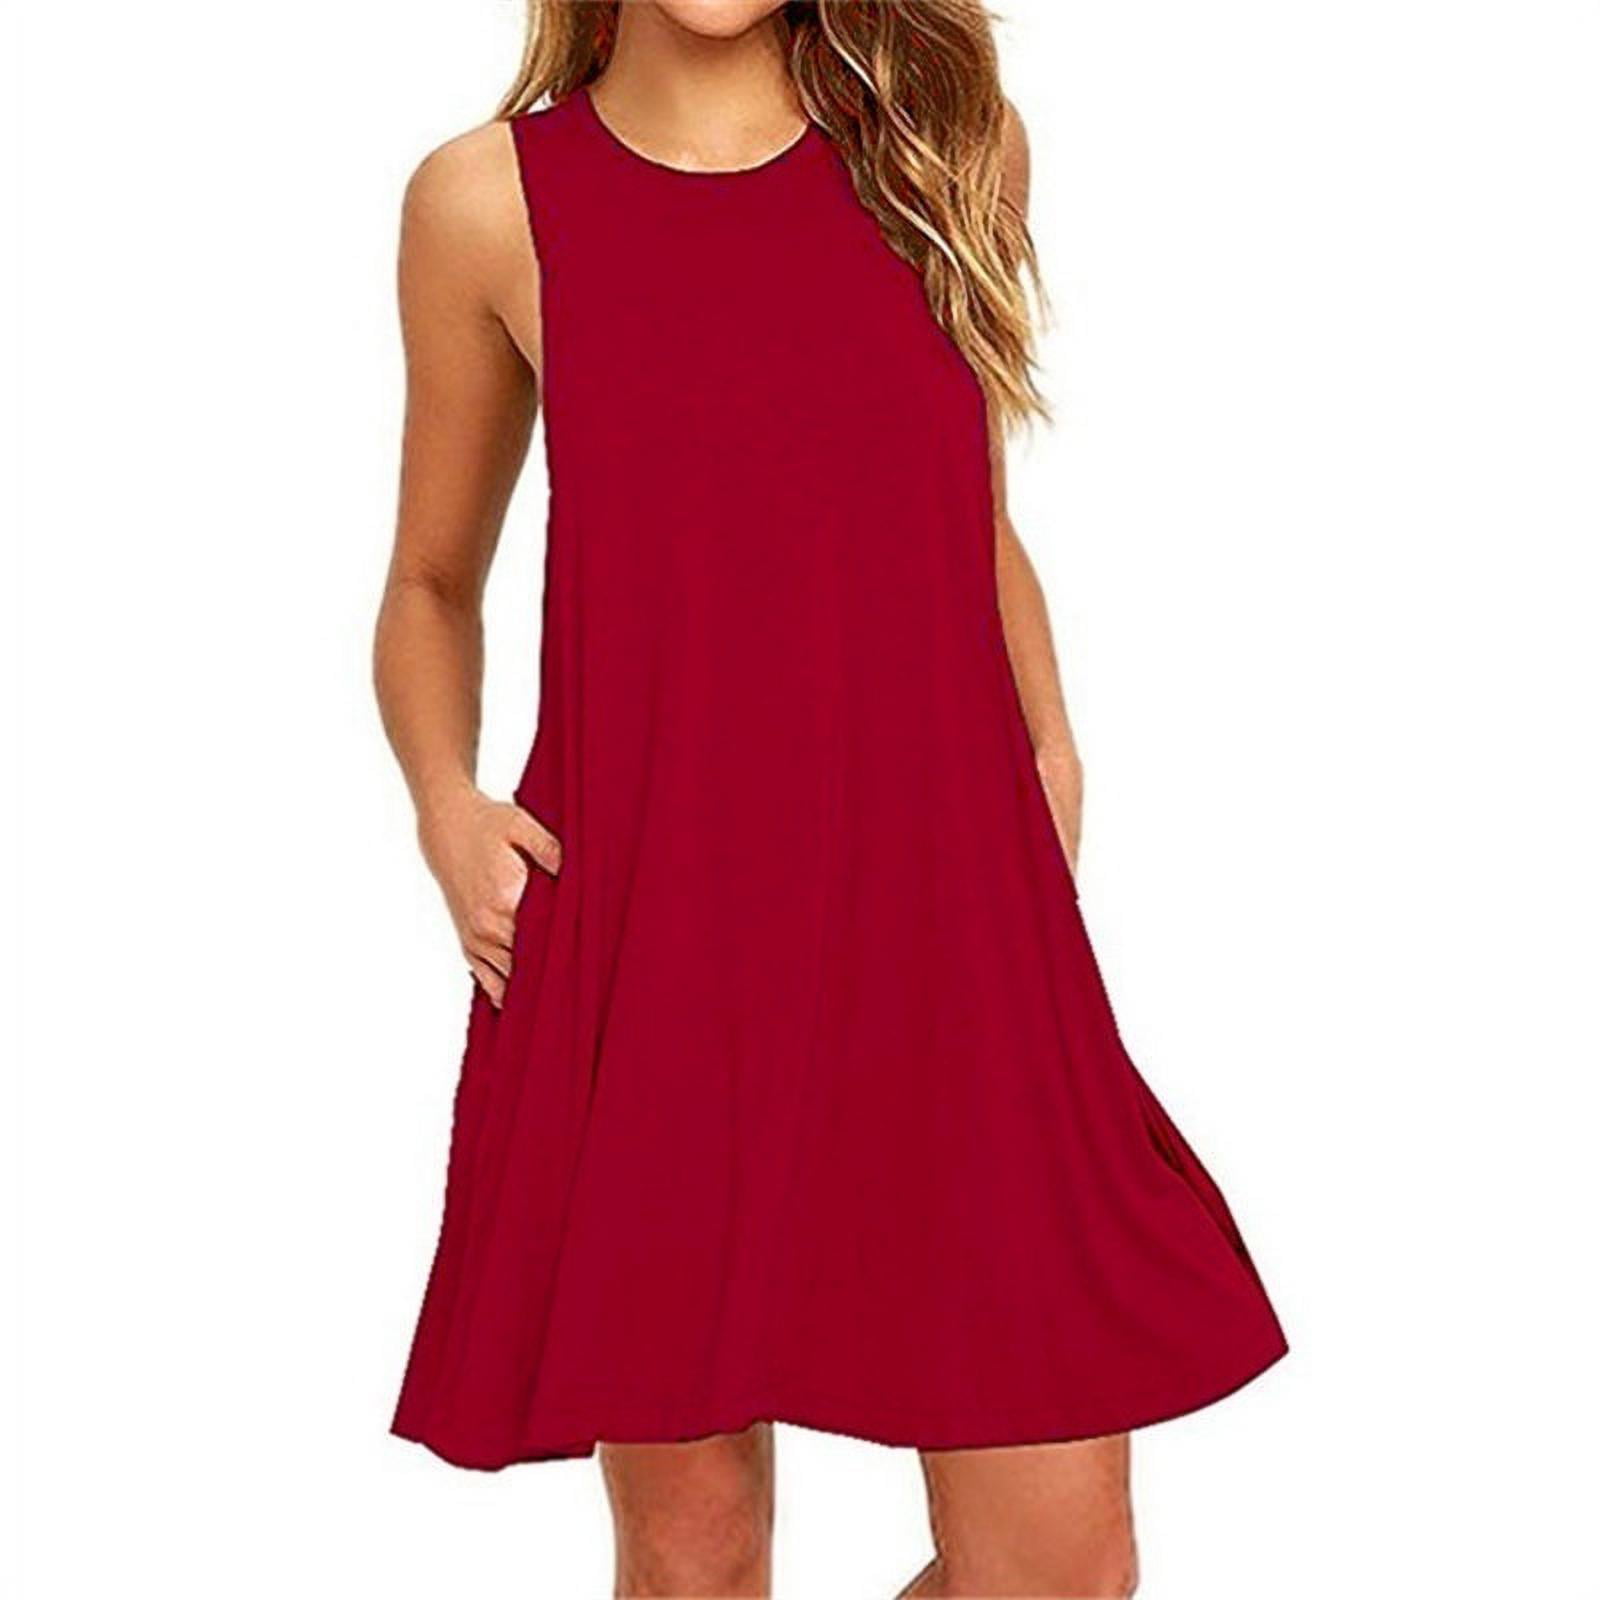 Women Summer Casual Sleeveless Cotton Polyester Dresses Pure Color ...